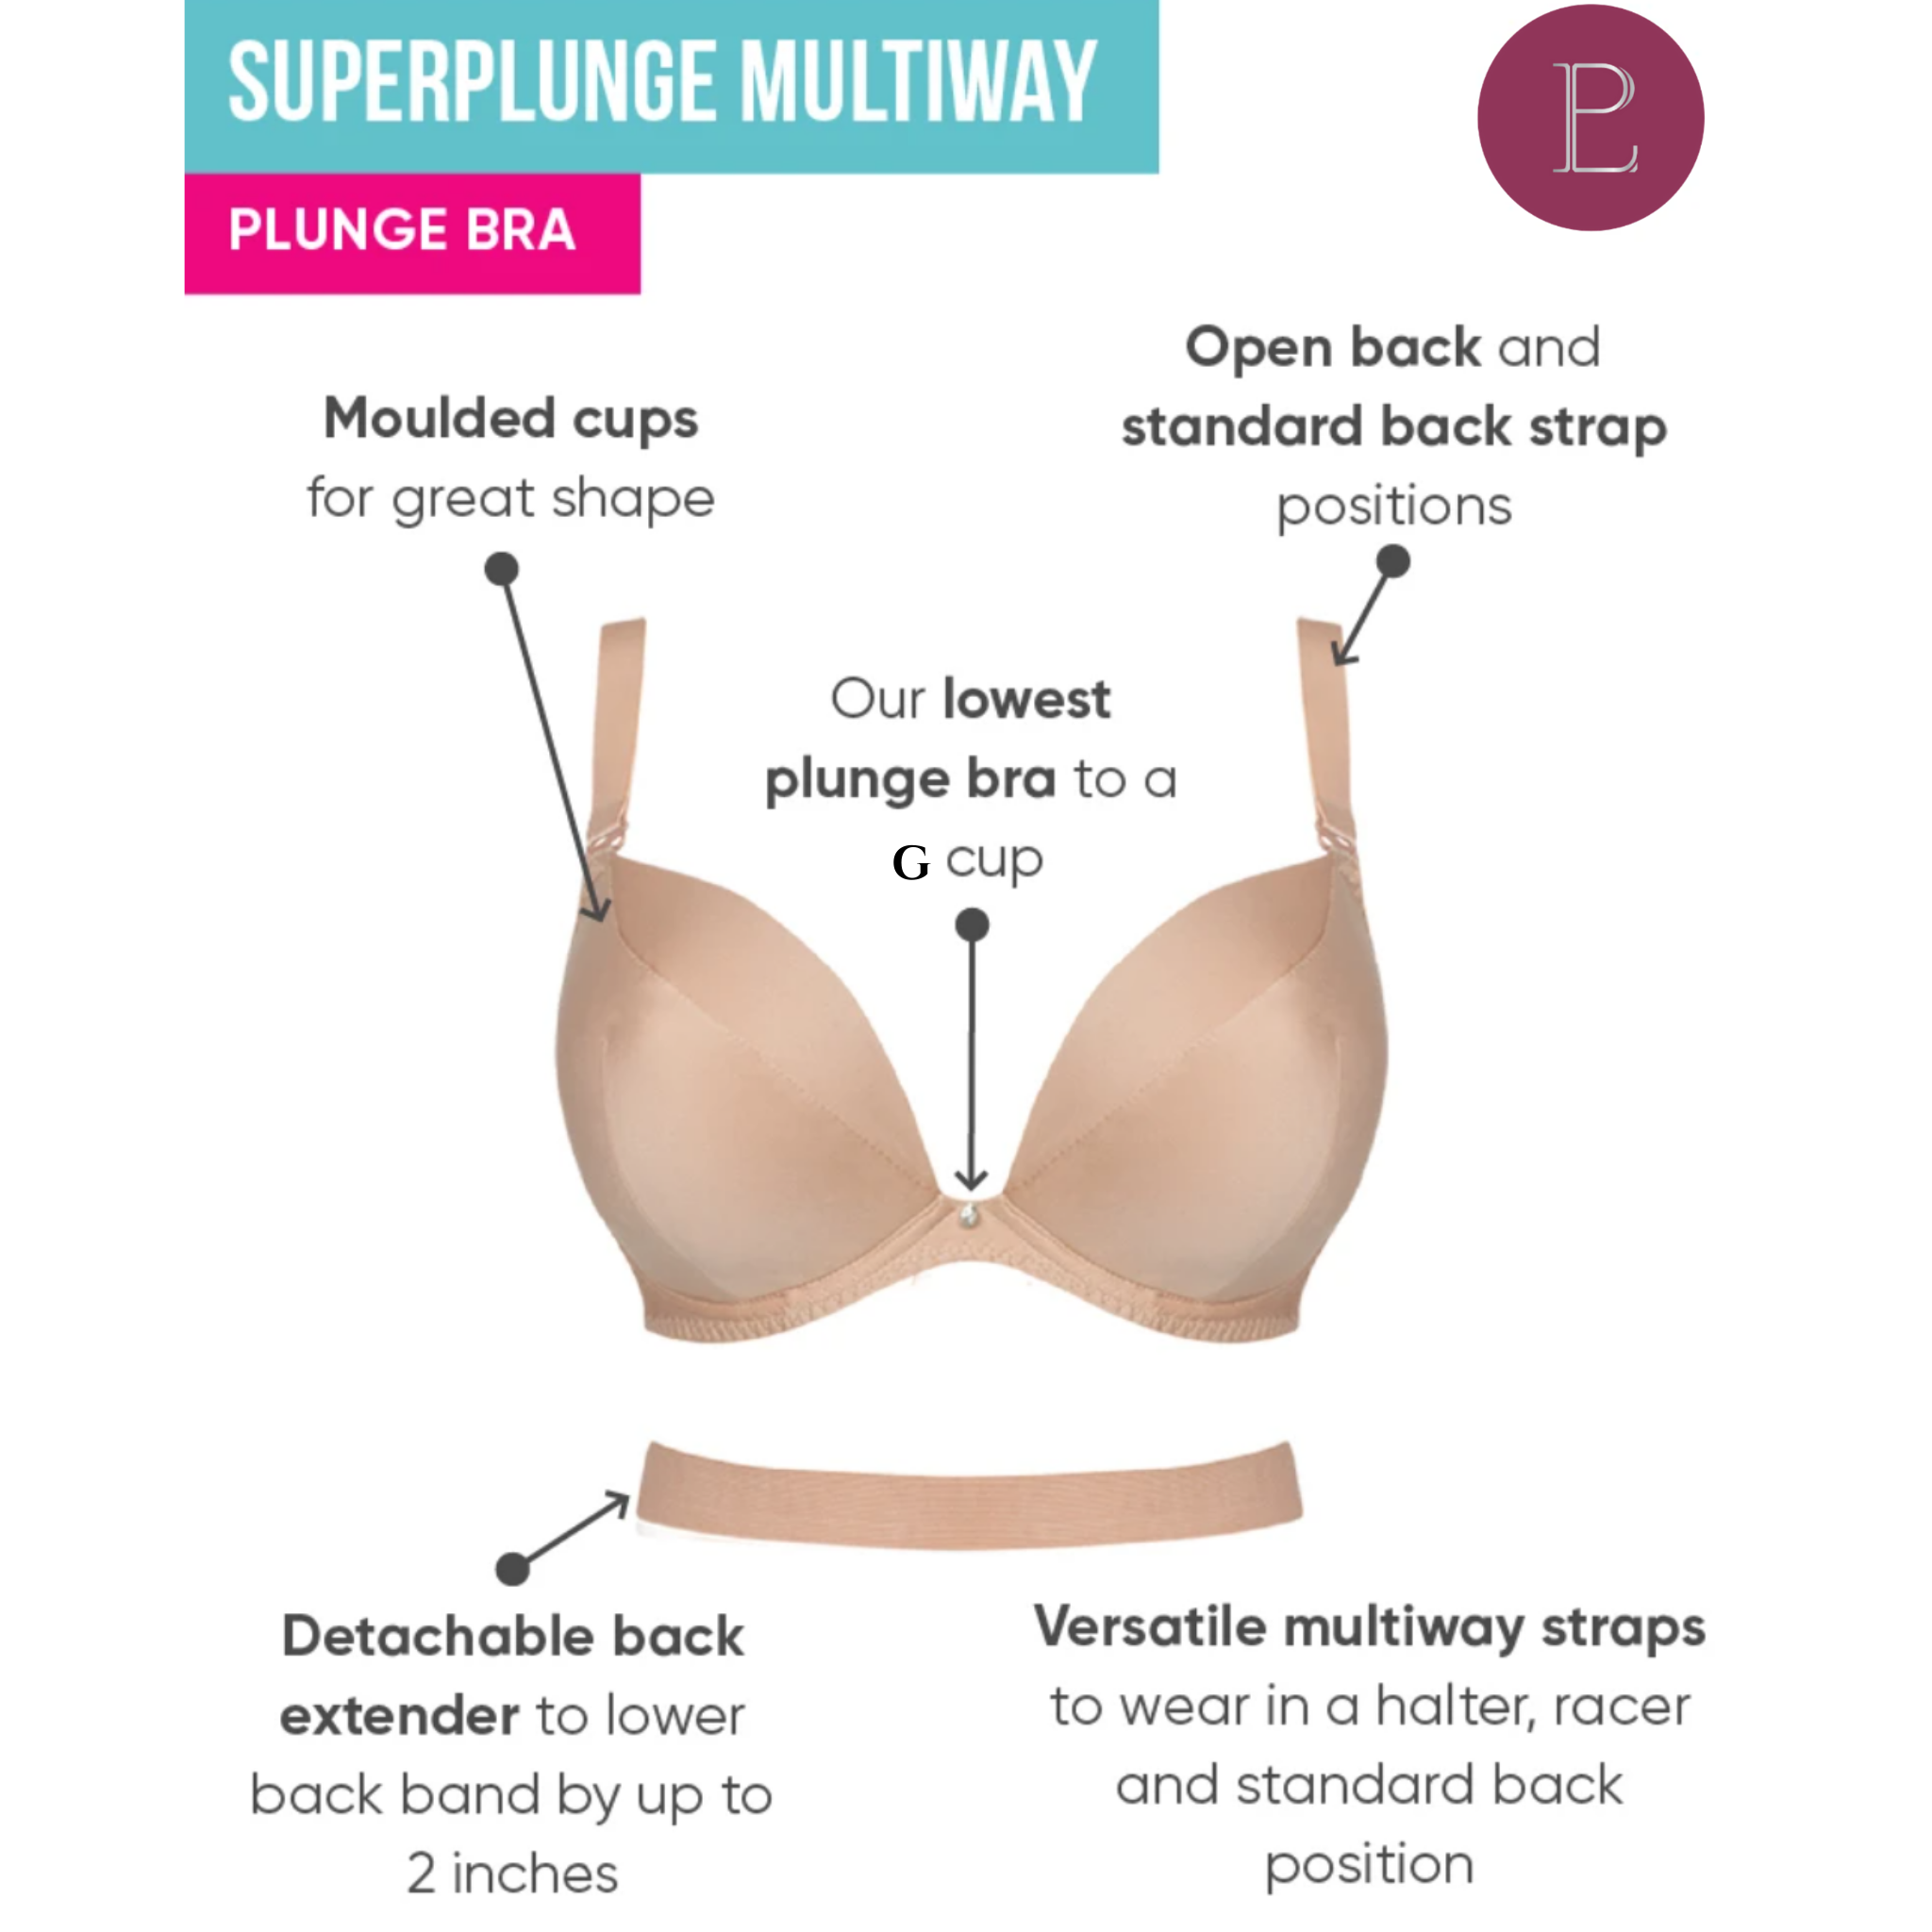 Curvy Kate Super Plunge Multiway Bra with moulded cups and detachable back extender